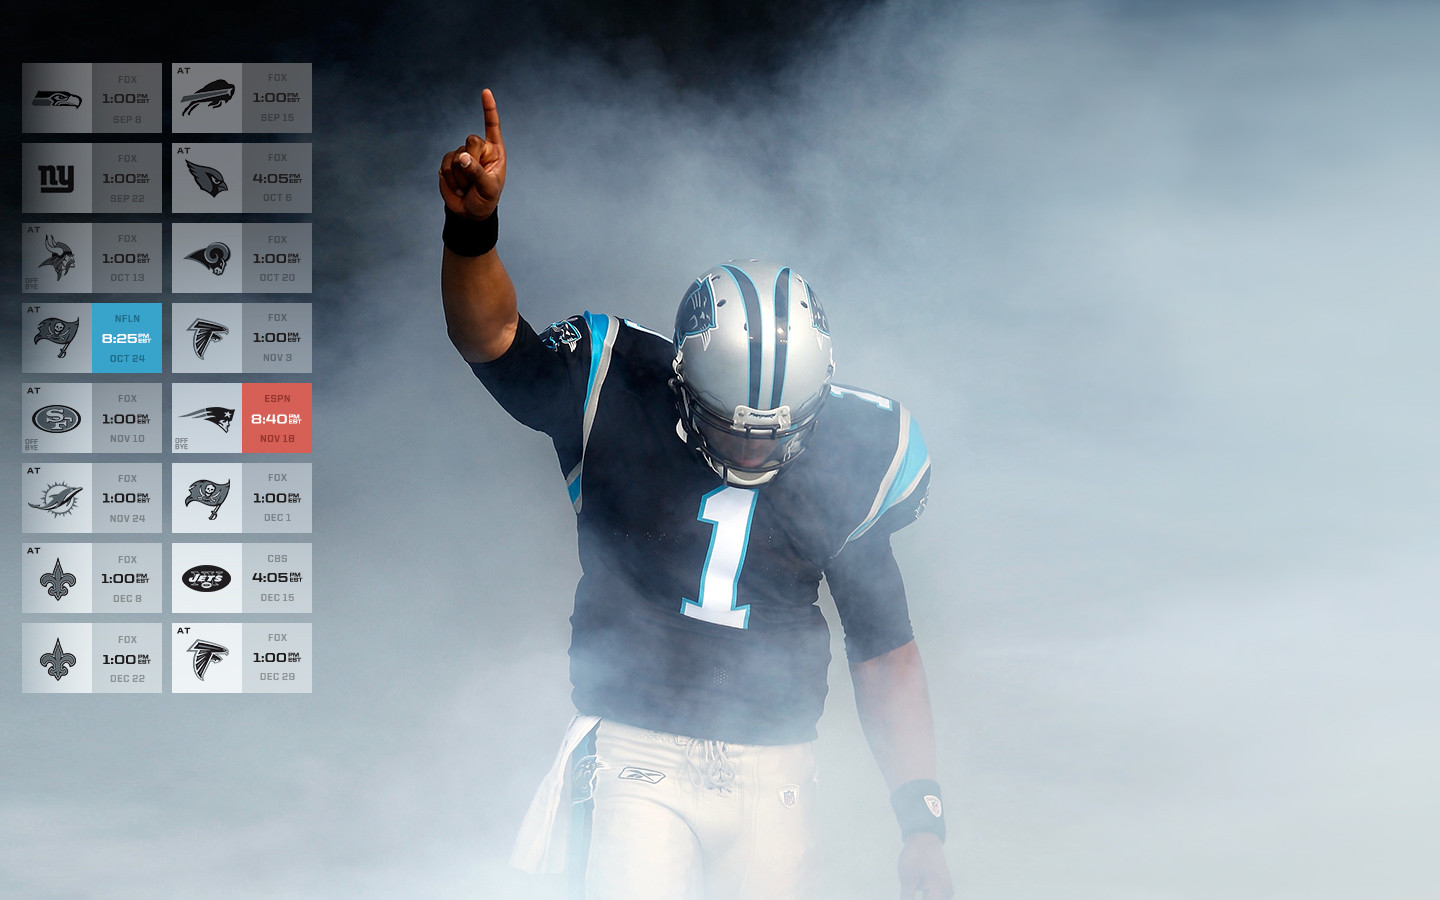 Carolina Panthers Wallpaper Collection For